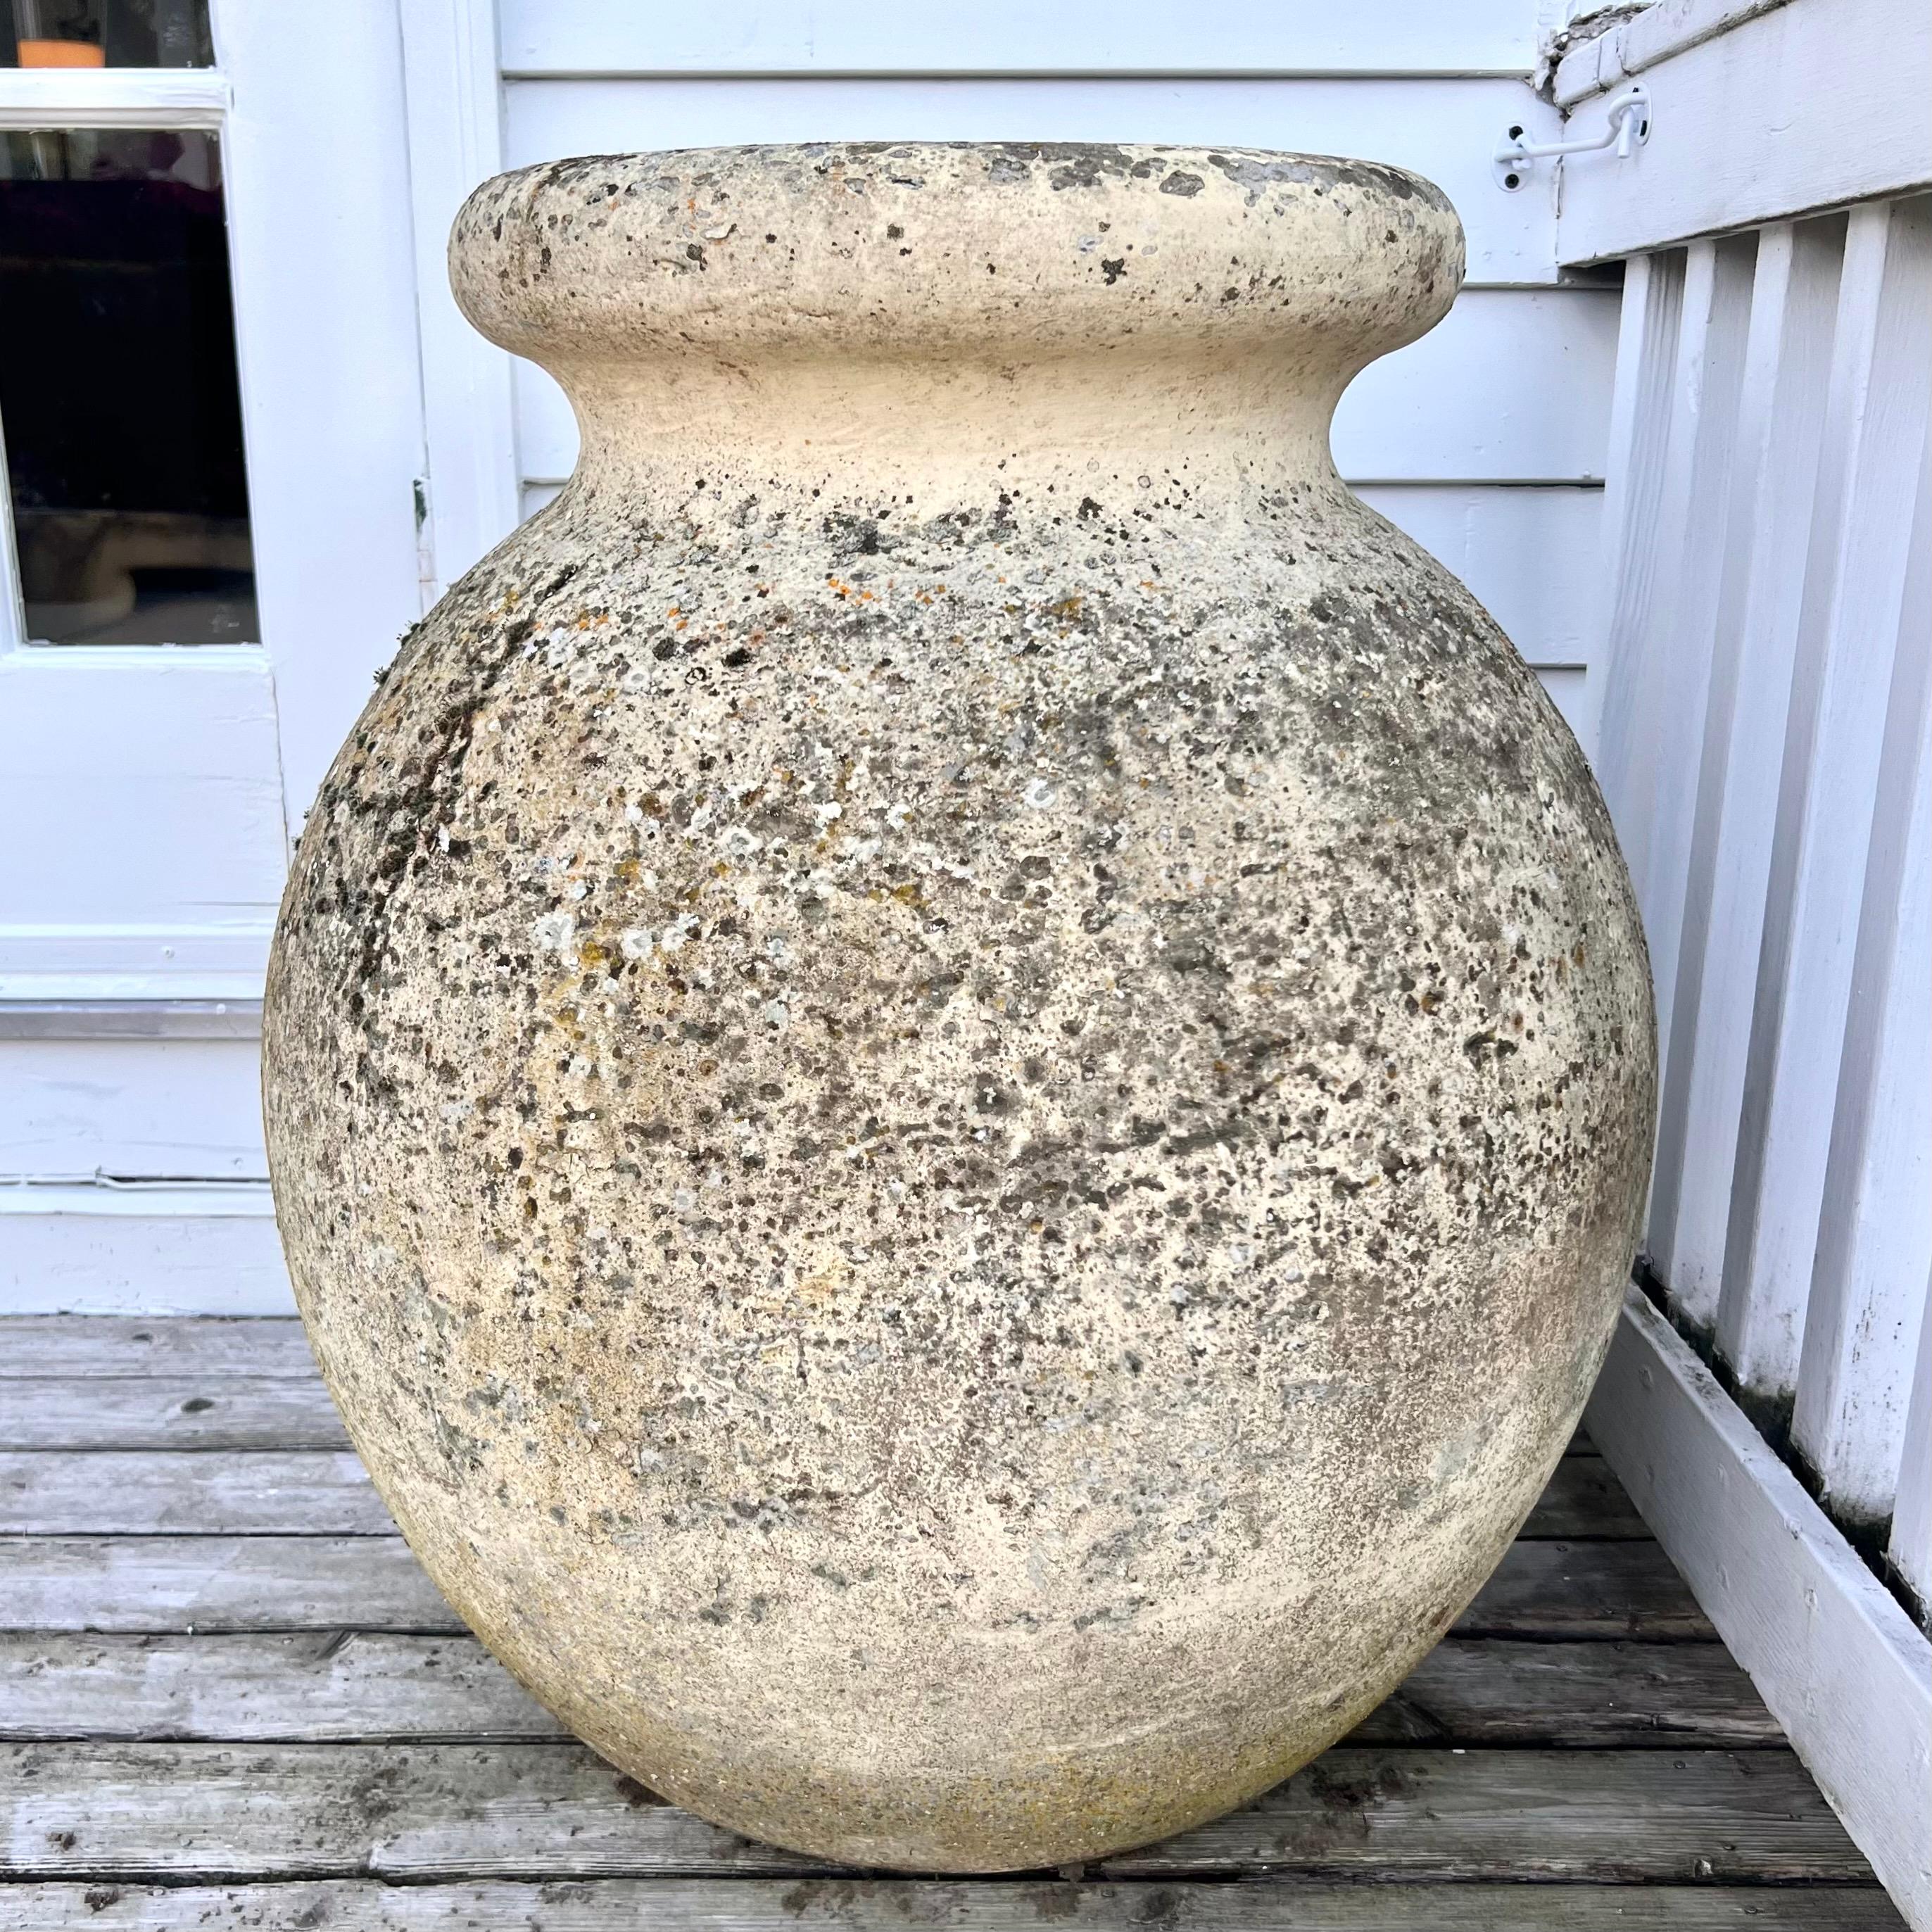 Colossal Willy Guhl Olive Jar Planter, 1960s Switzerland For Sale 2